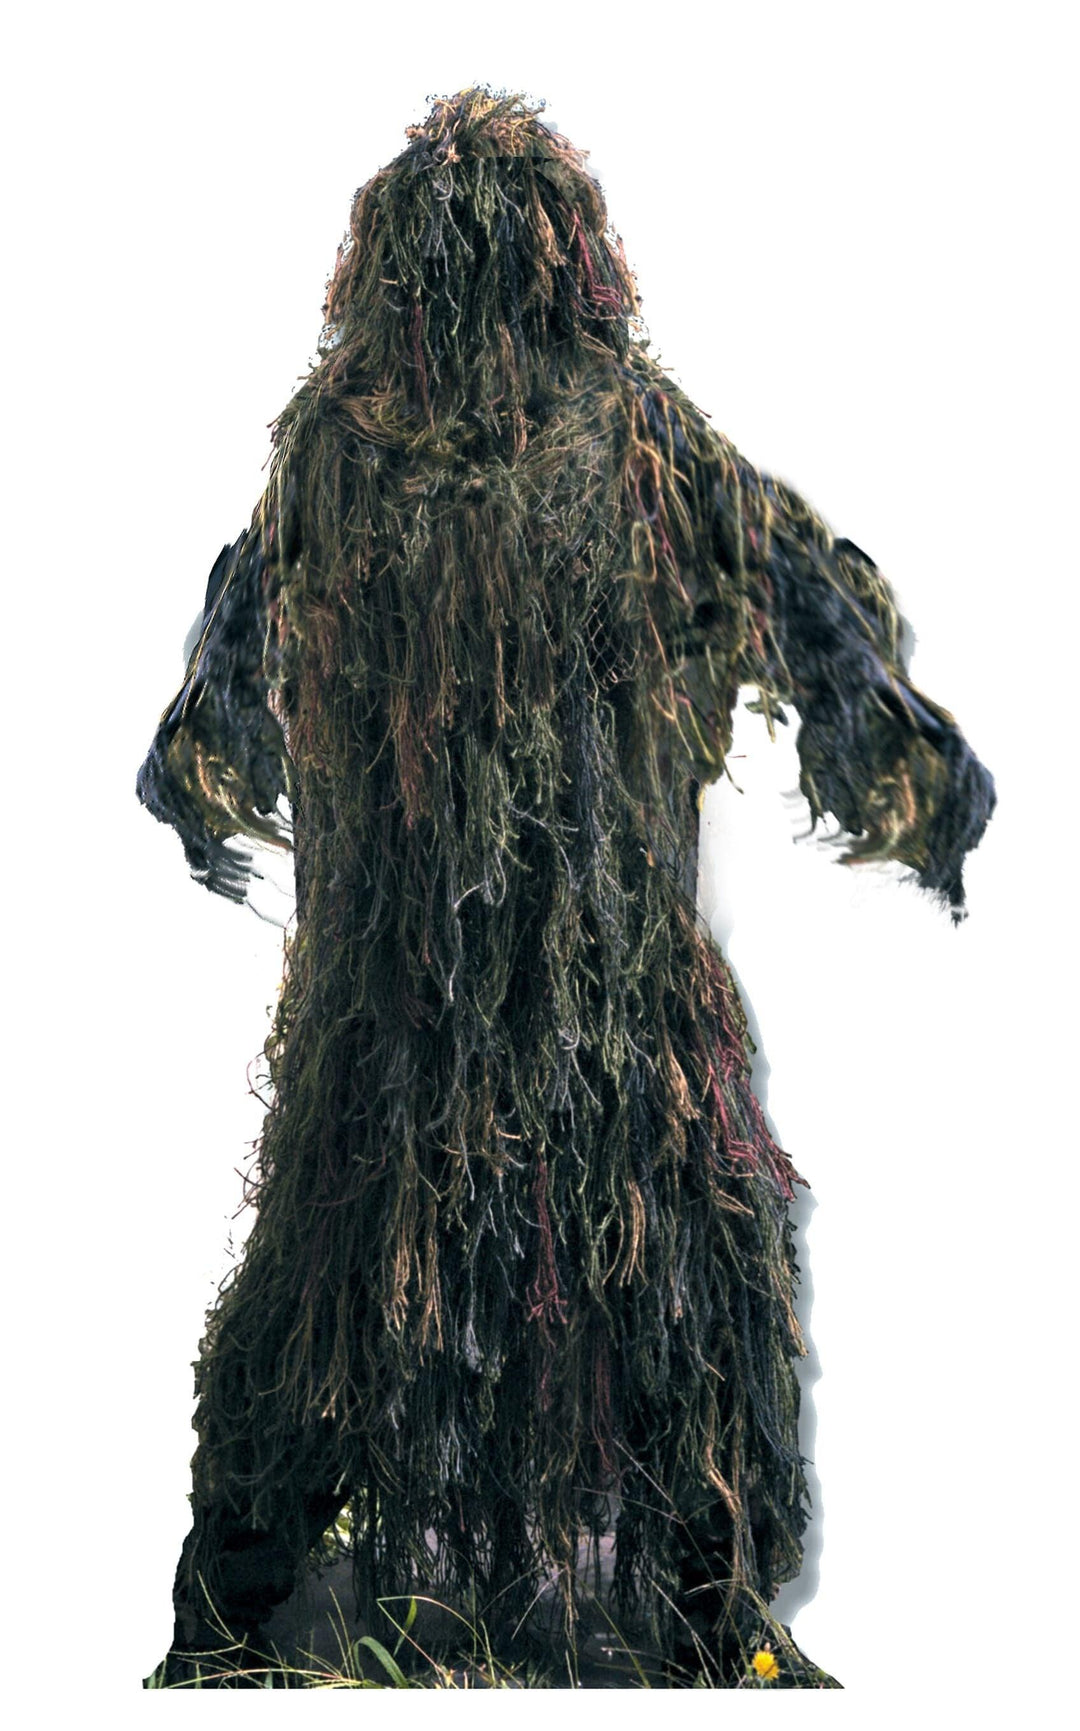 Rothco’s Kids Lightweight All Purpose Ghillie Suit - Legendary USA